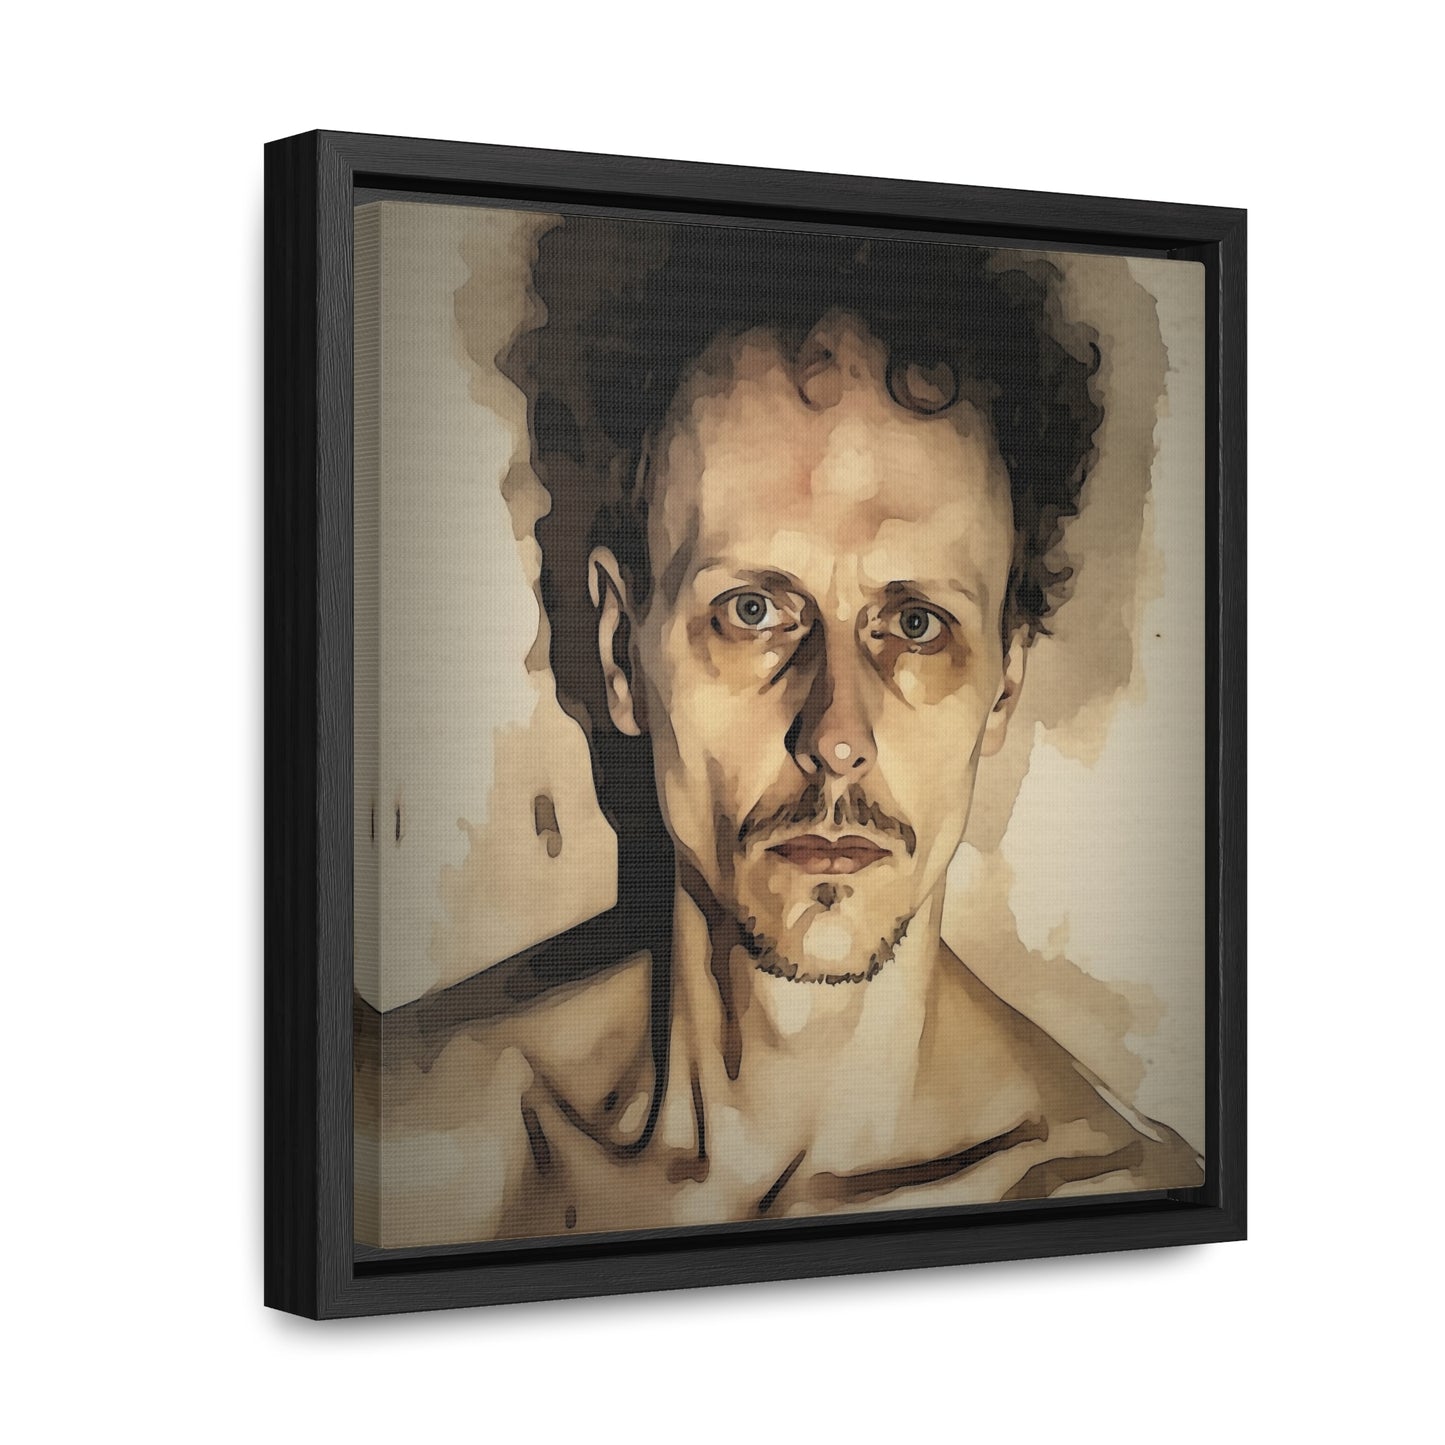 Dark Age 18, Gallery Canvas Wraps, Square Frame